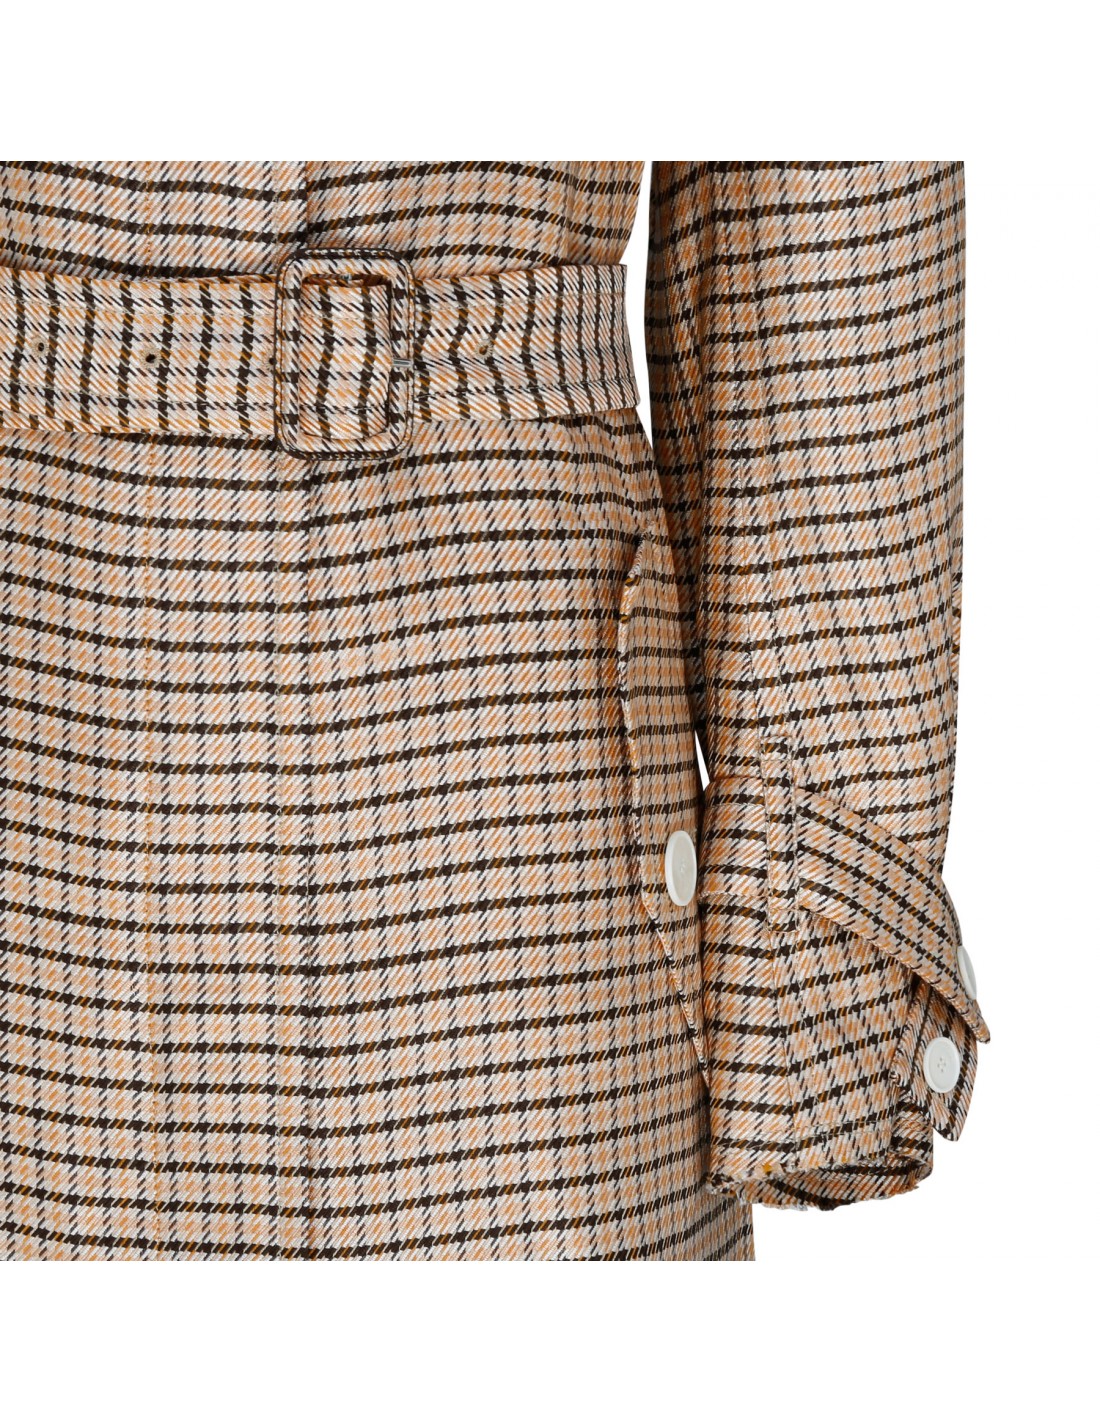 Houndstooth trench coat